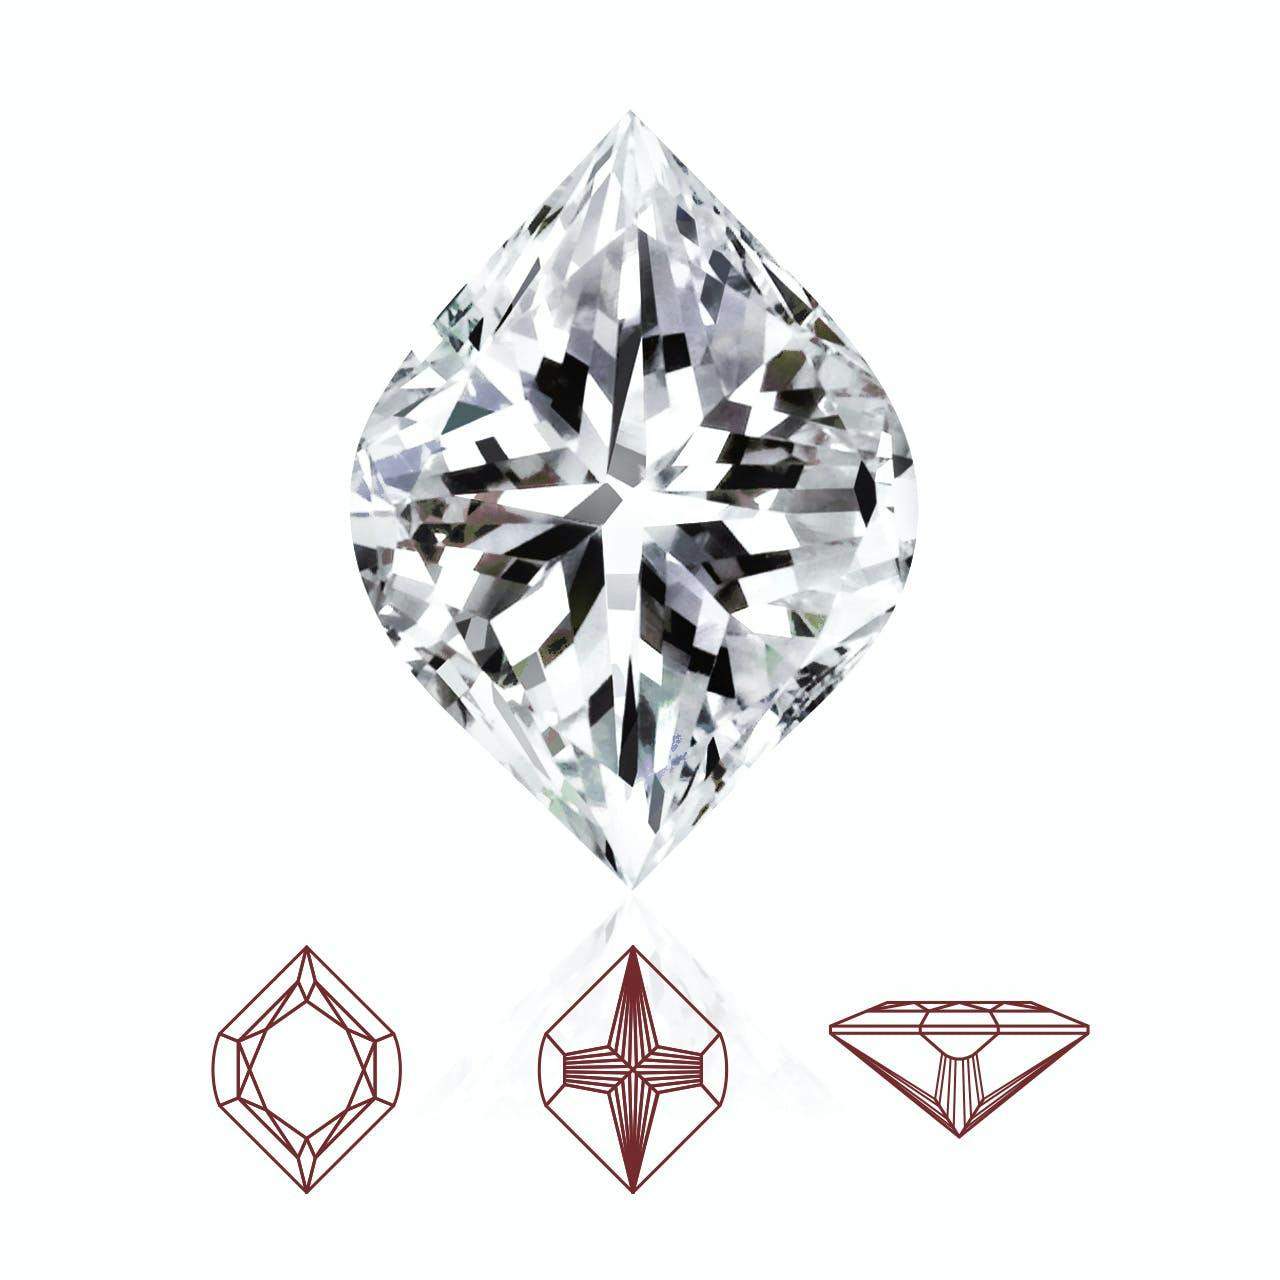 Calla cut among different types of diamond cut from different angles